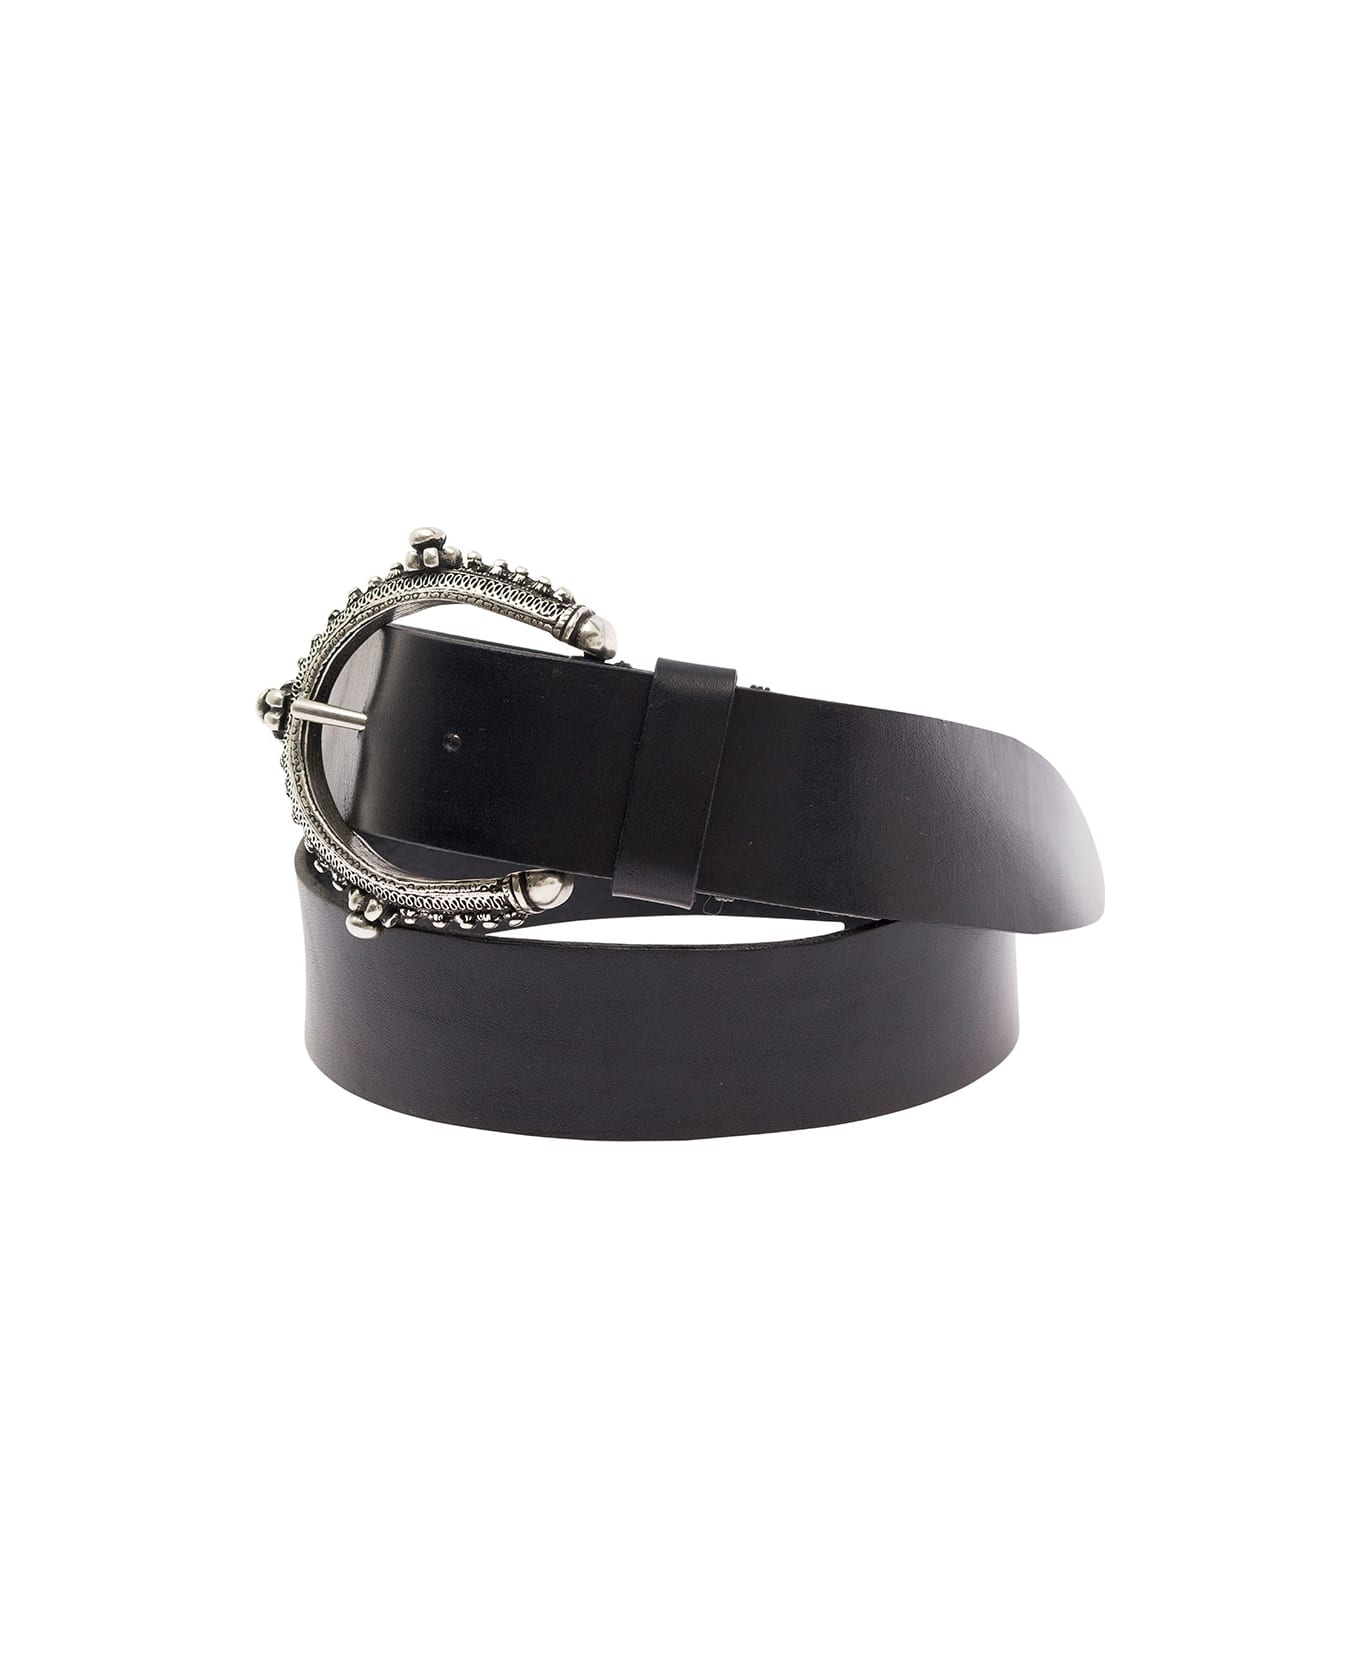 Parosh Black Belt With Circle Buckle In Leather Woman - Black